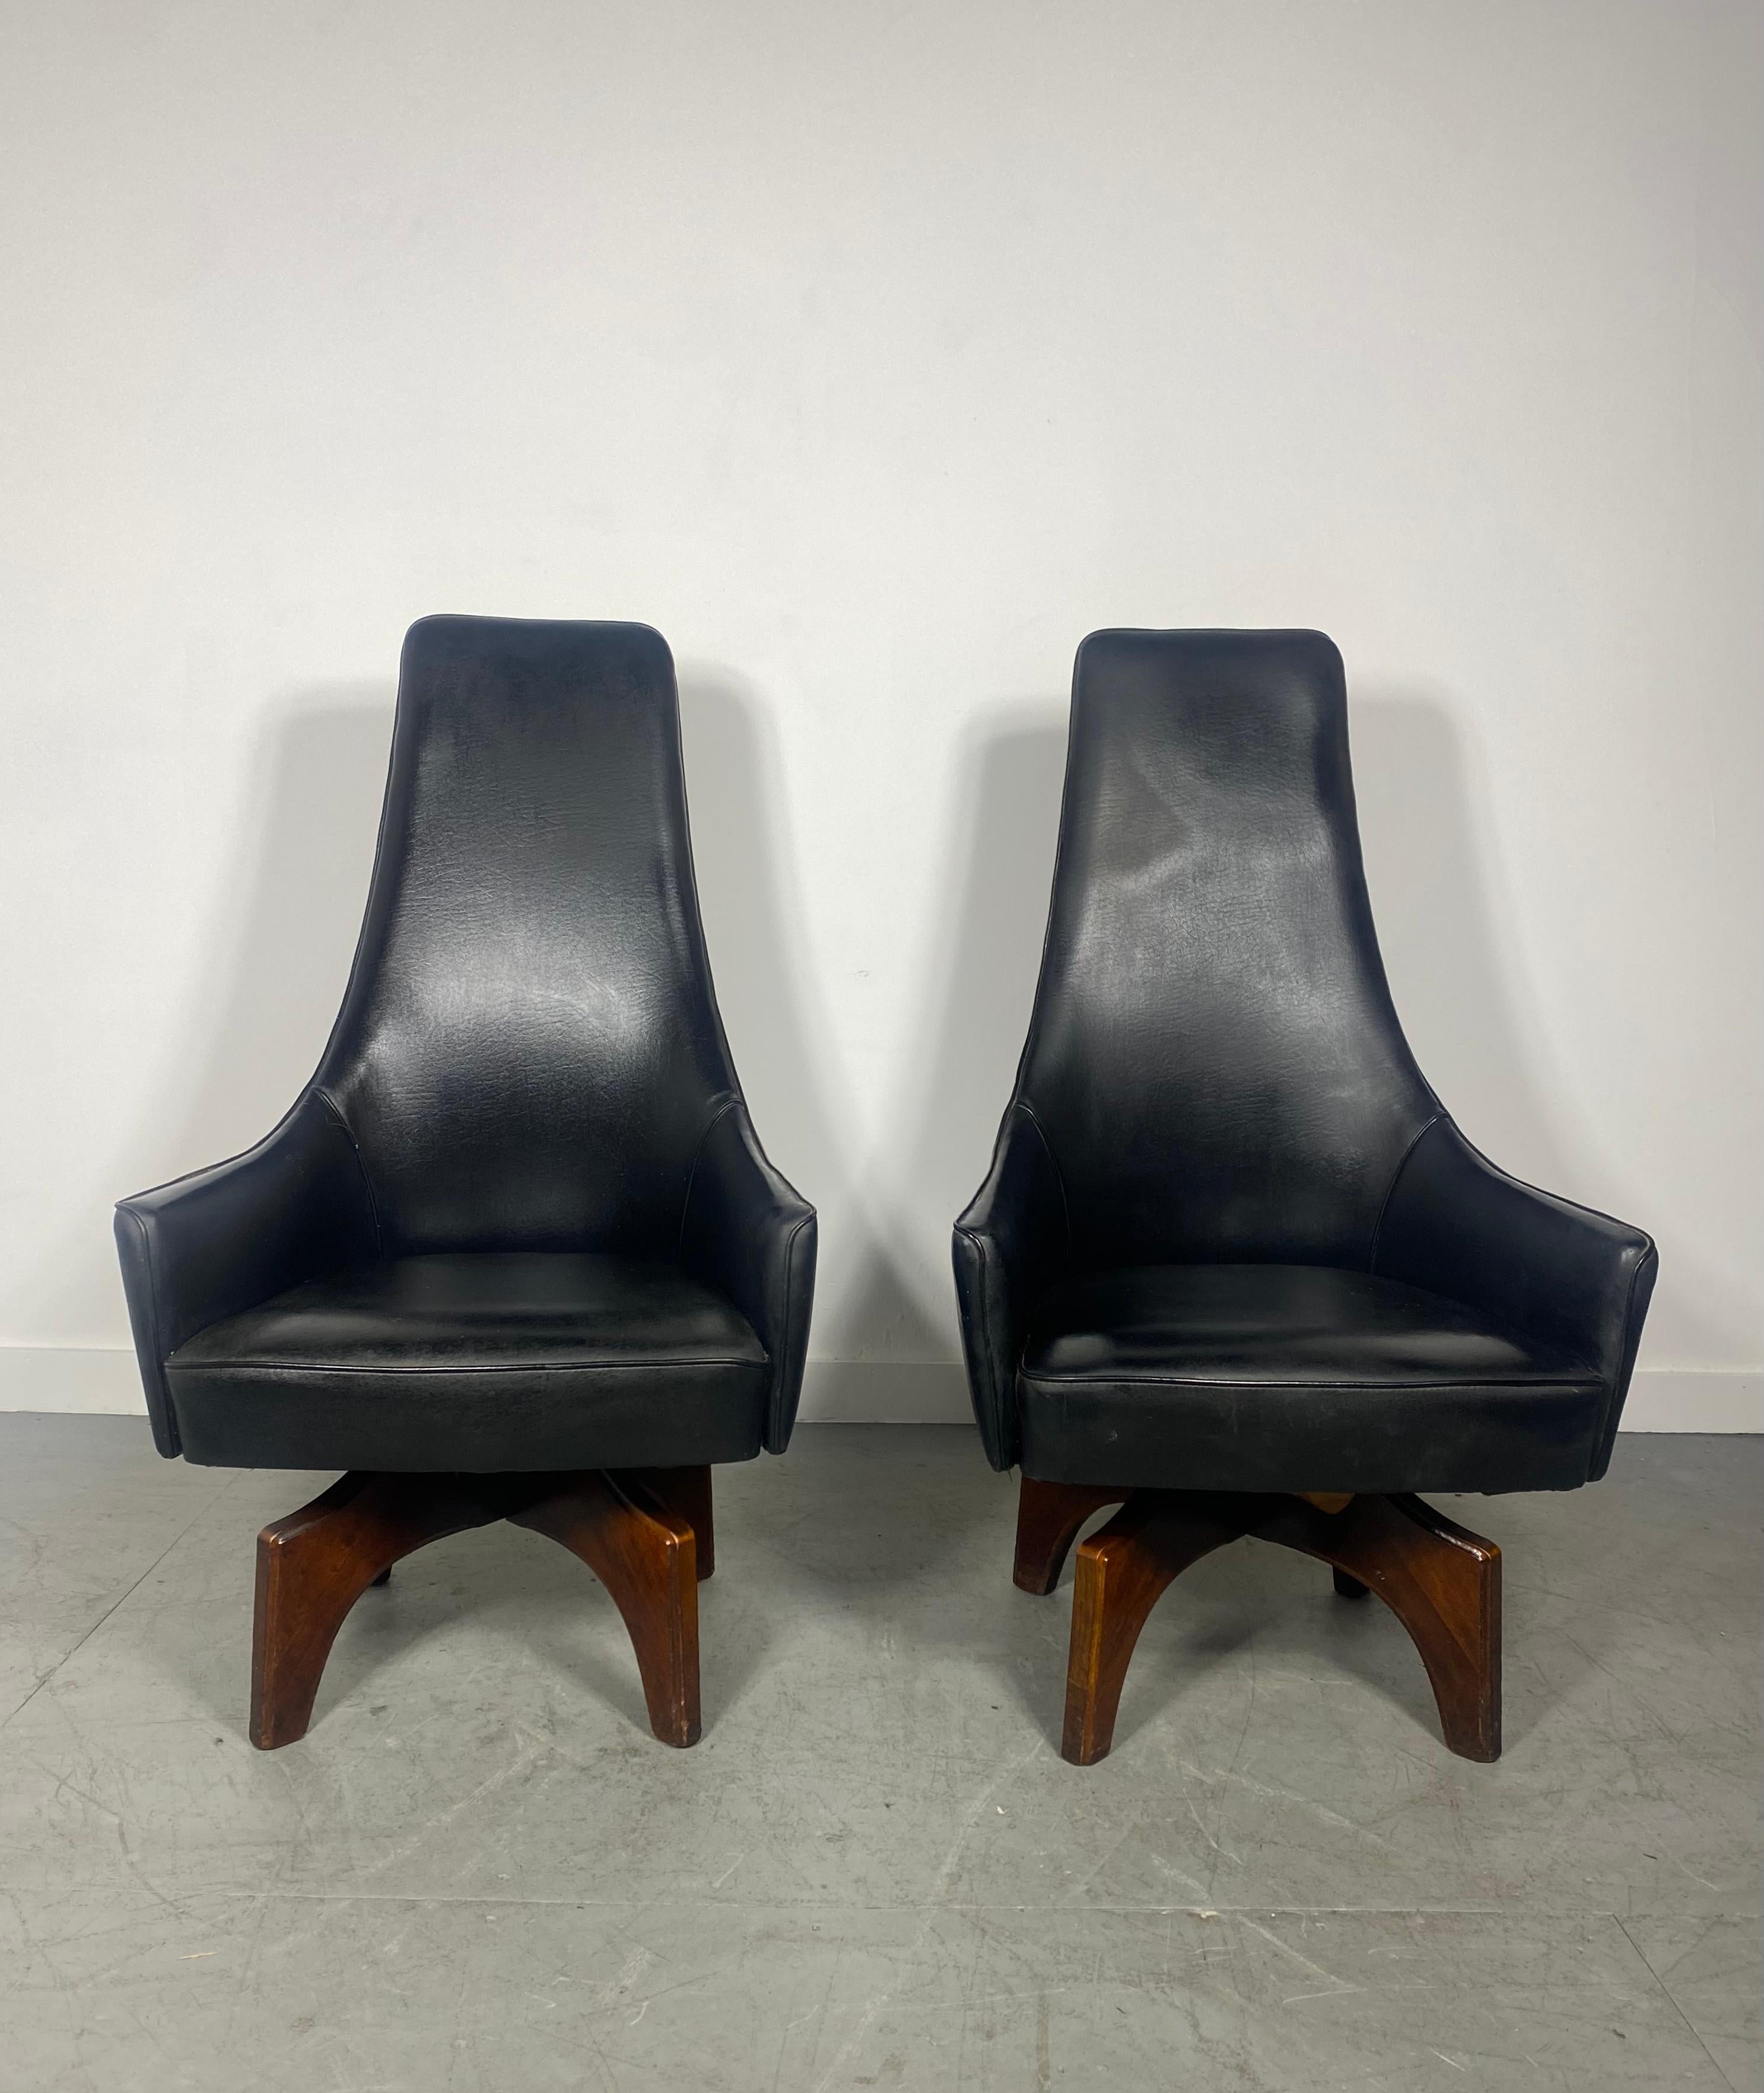 Unusual High Back Swivel Arm Chairs by Virtue Bros..Possibly designed by Adrian Pearsall ? 380% swivel,,, extremely comfortable..Stylized walnut bases.. Embossed leather shield design to backs.Classic 1950s ,60s design..Would make amazing captains